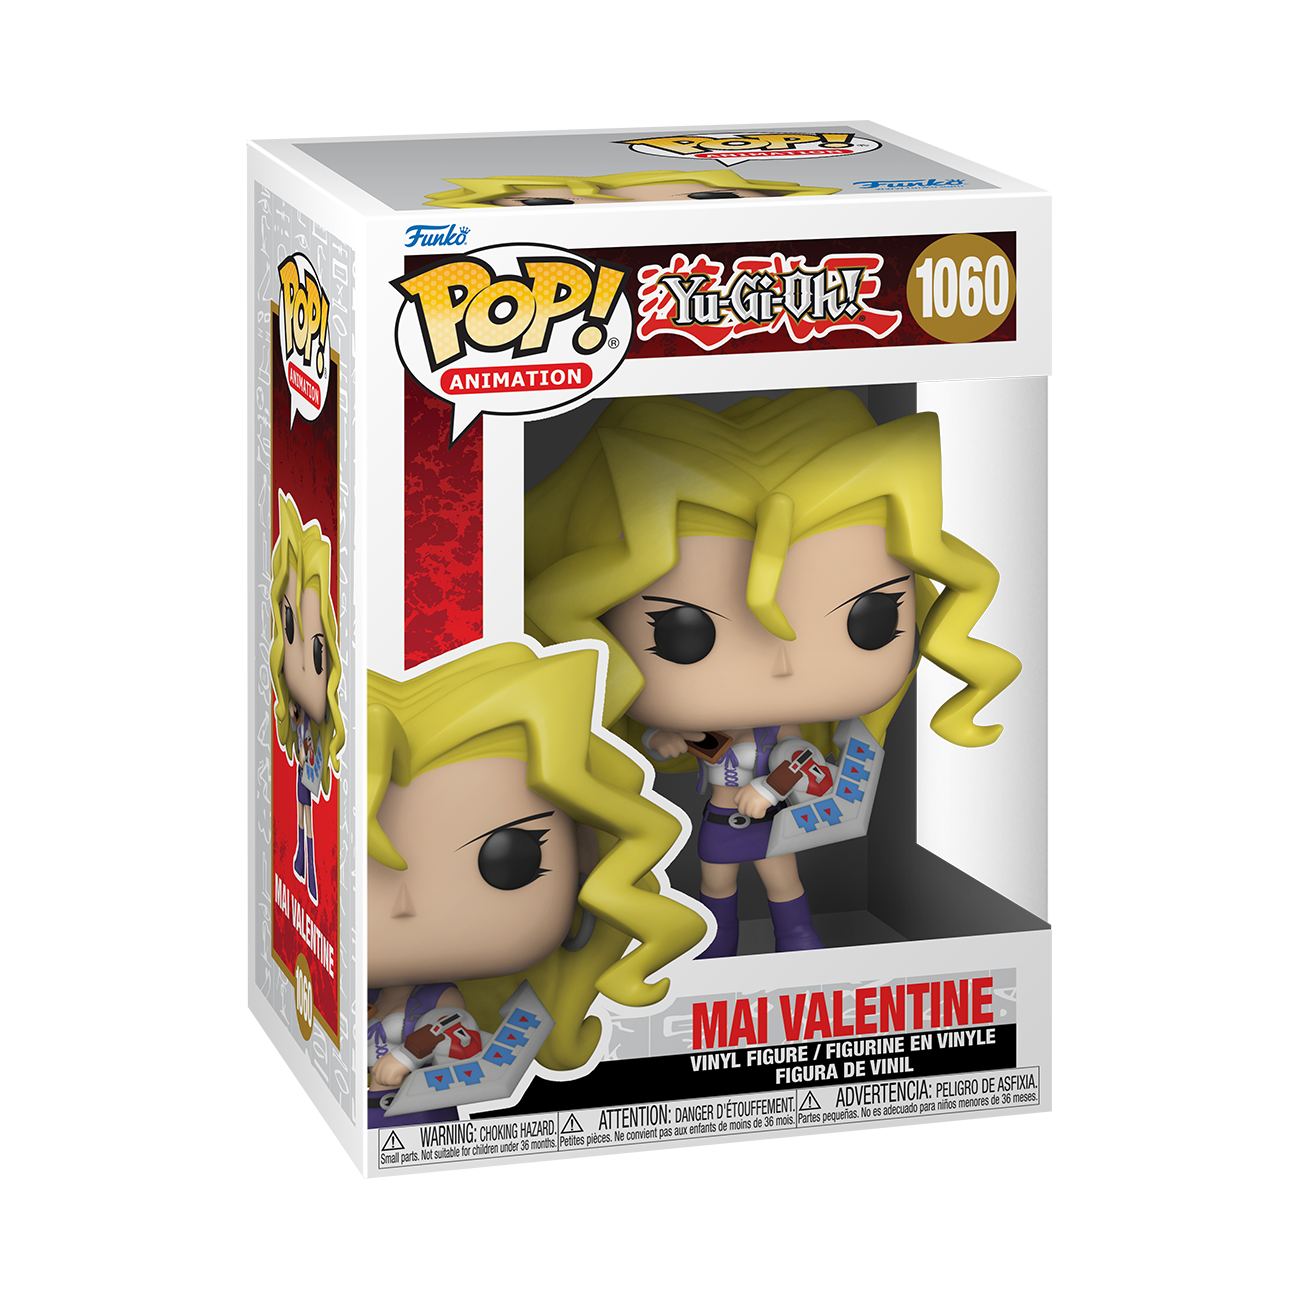  MAI VALENTINE ANIMATION ANIME YU-GI-OH! #1060 FUNKO POP!</p><BR>In Stock<BR>In Stock Safety Information<br>Warning: Not suitable for children under 3 years. Small Parts. 